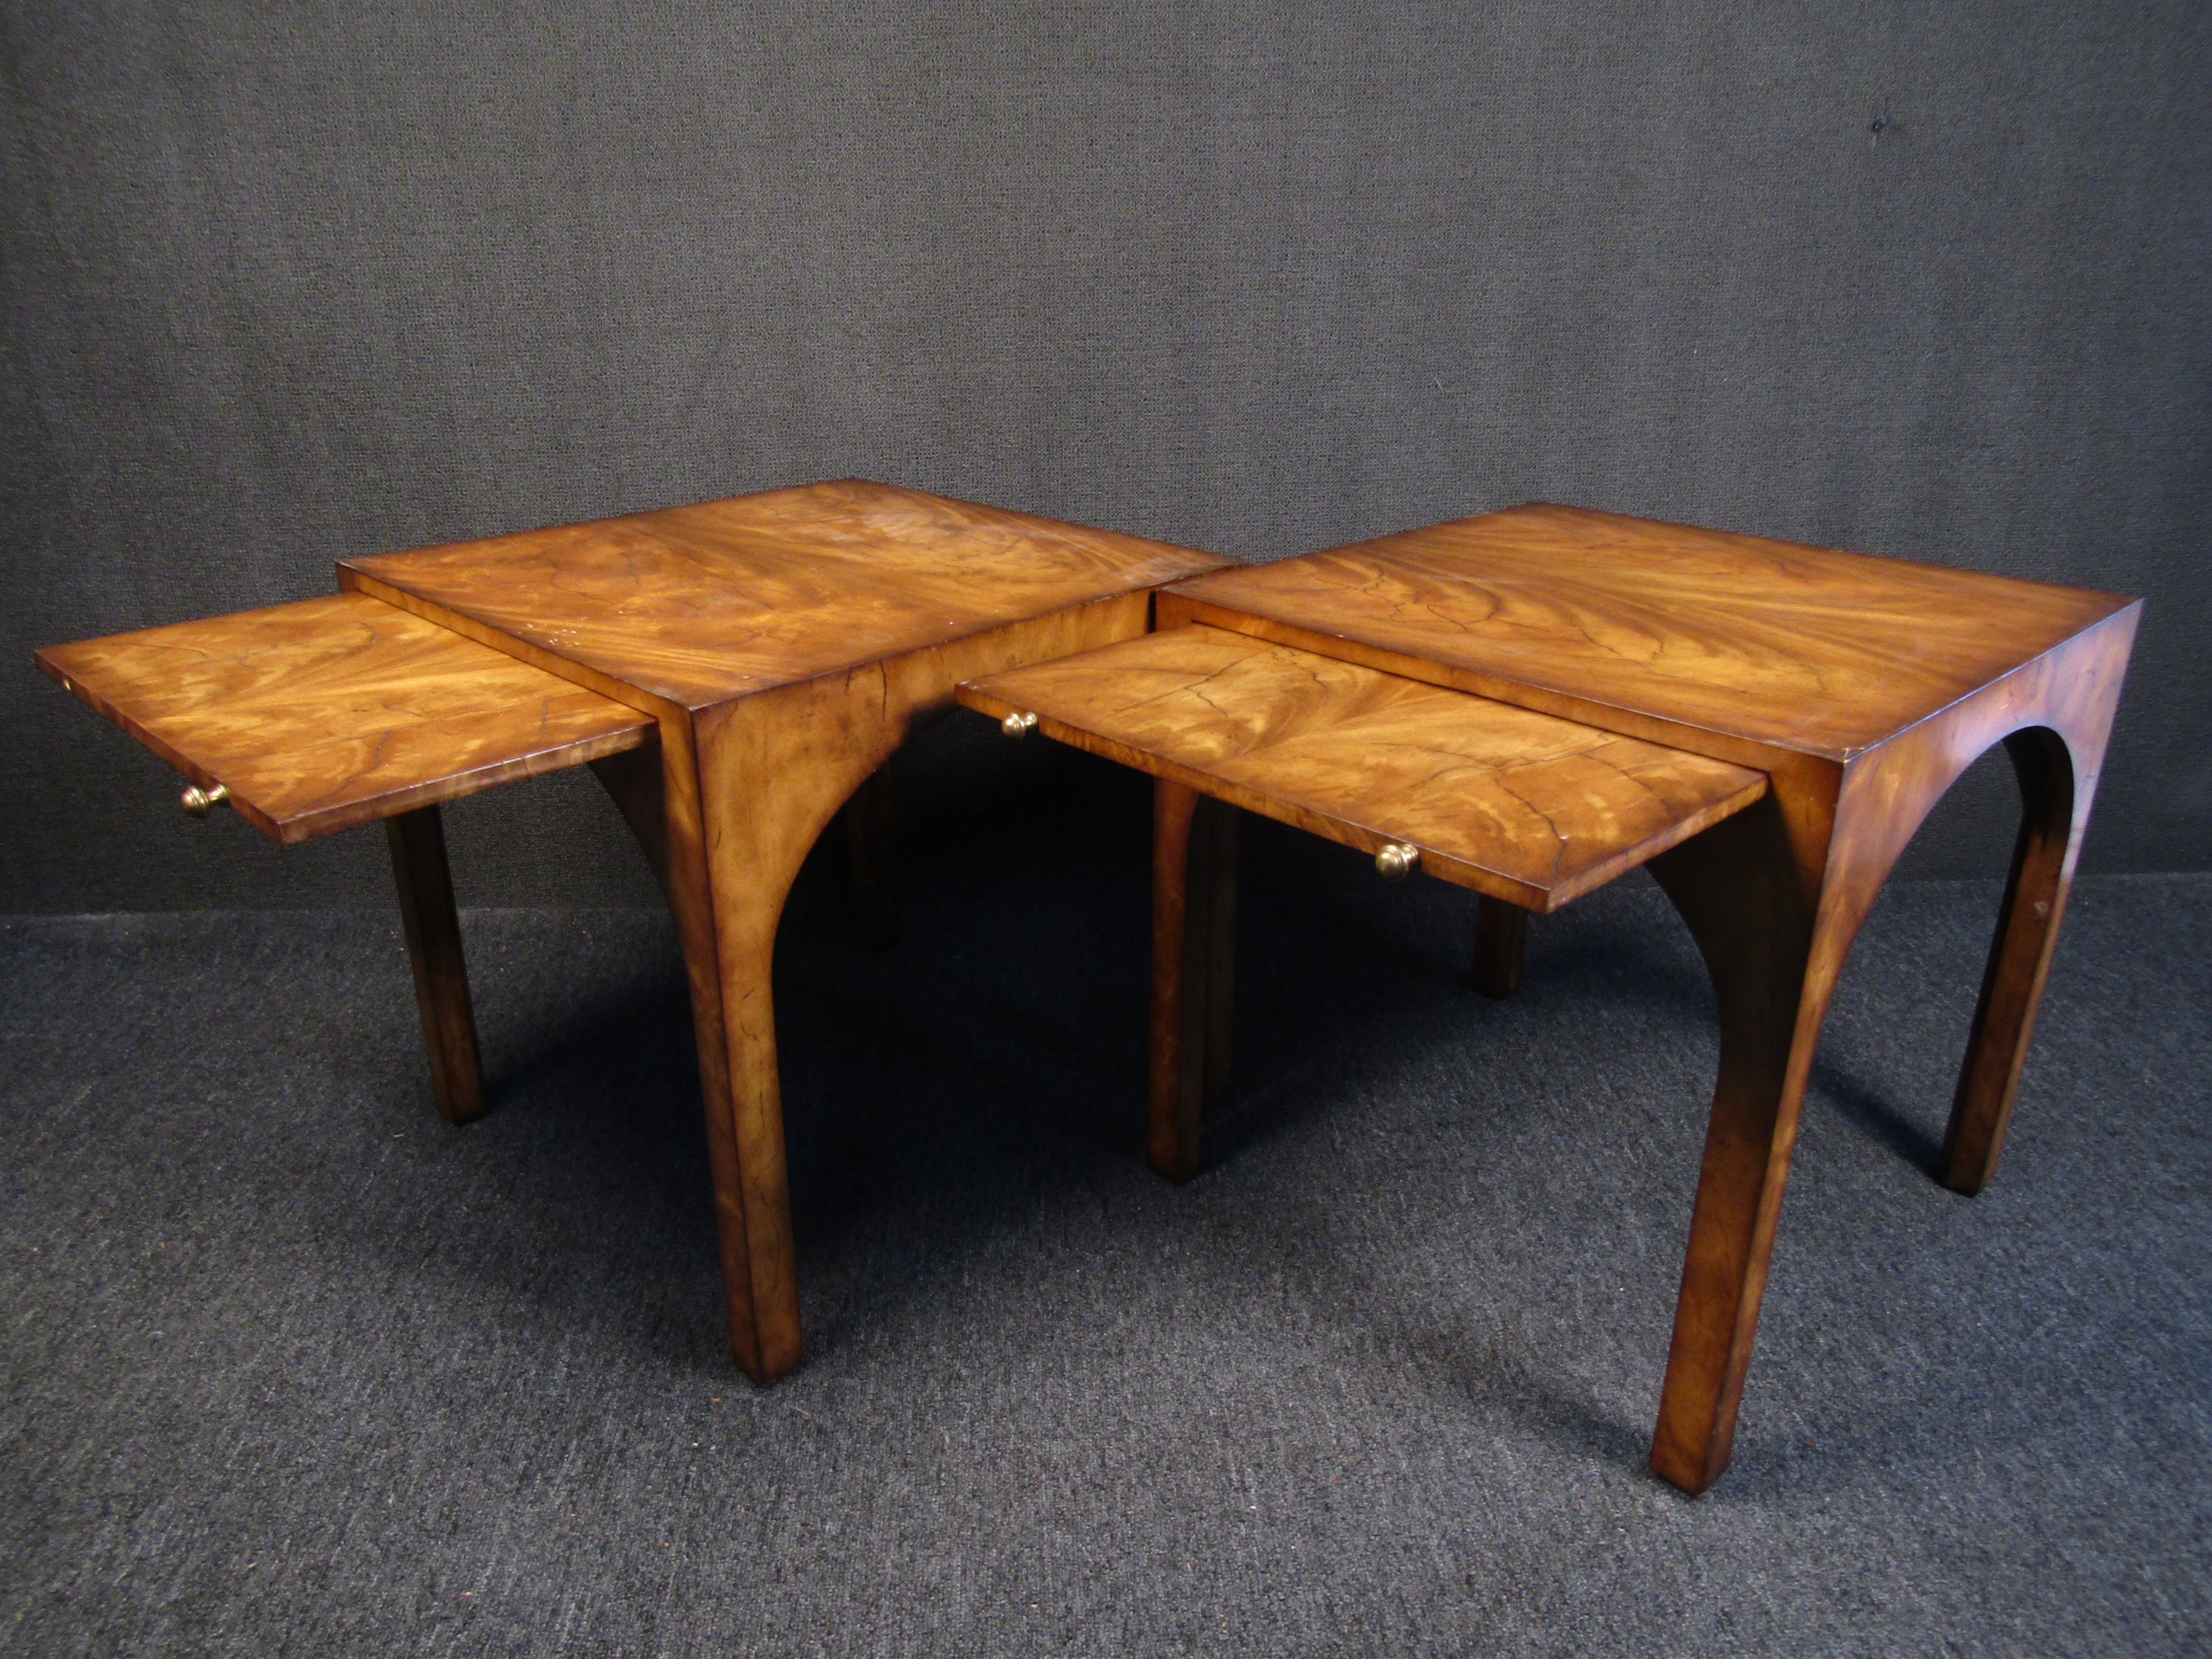 Wood Pair of Mid-Century Modern End Tables by Baker Furniture Co. For Sale